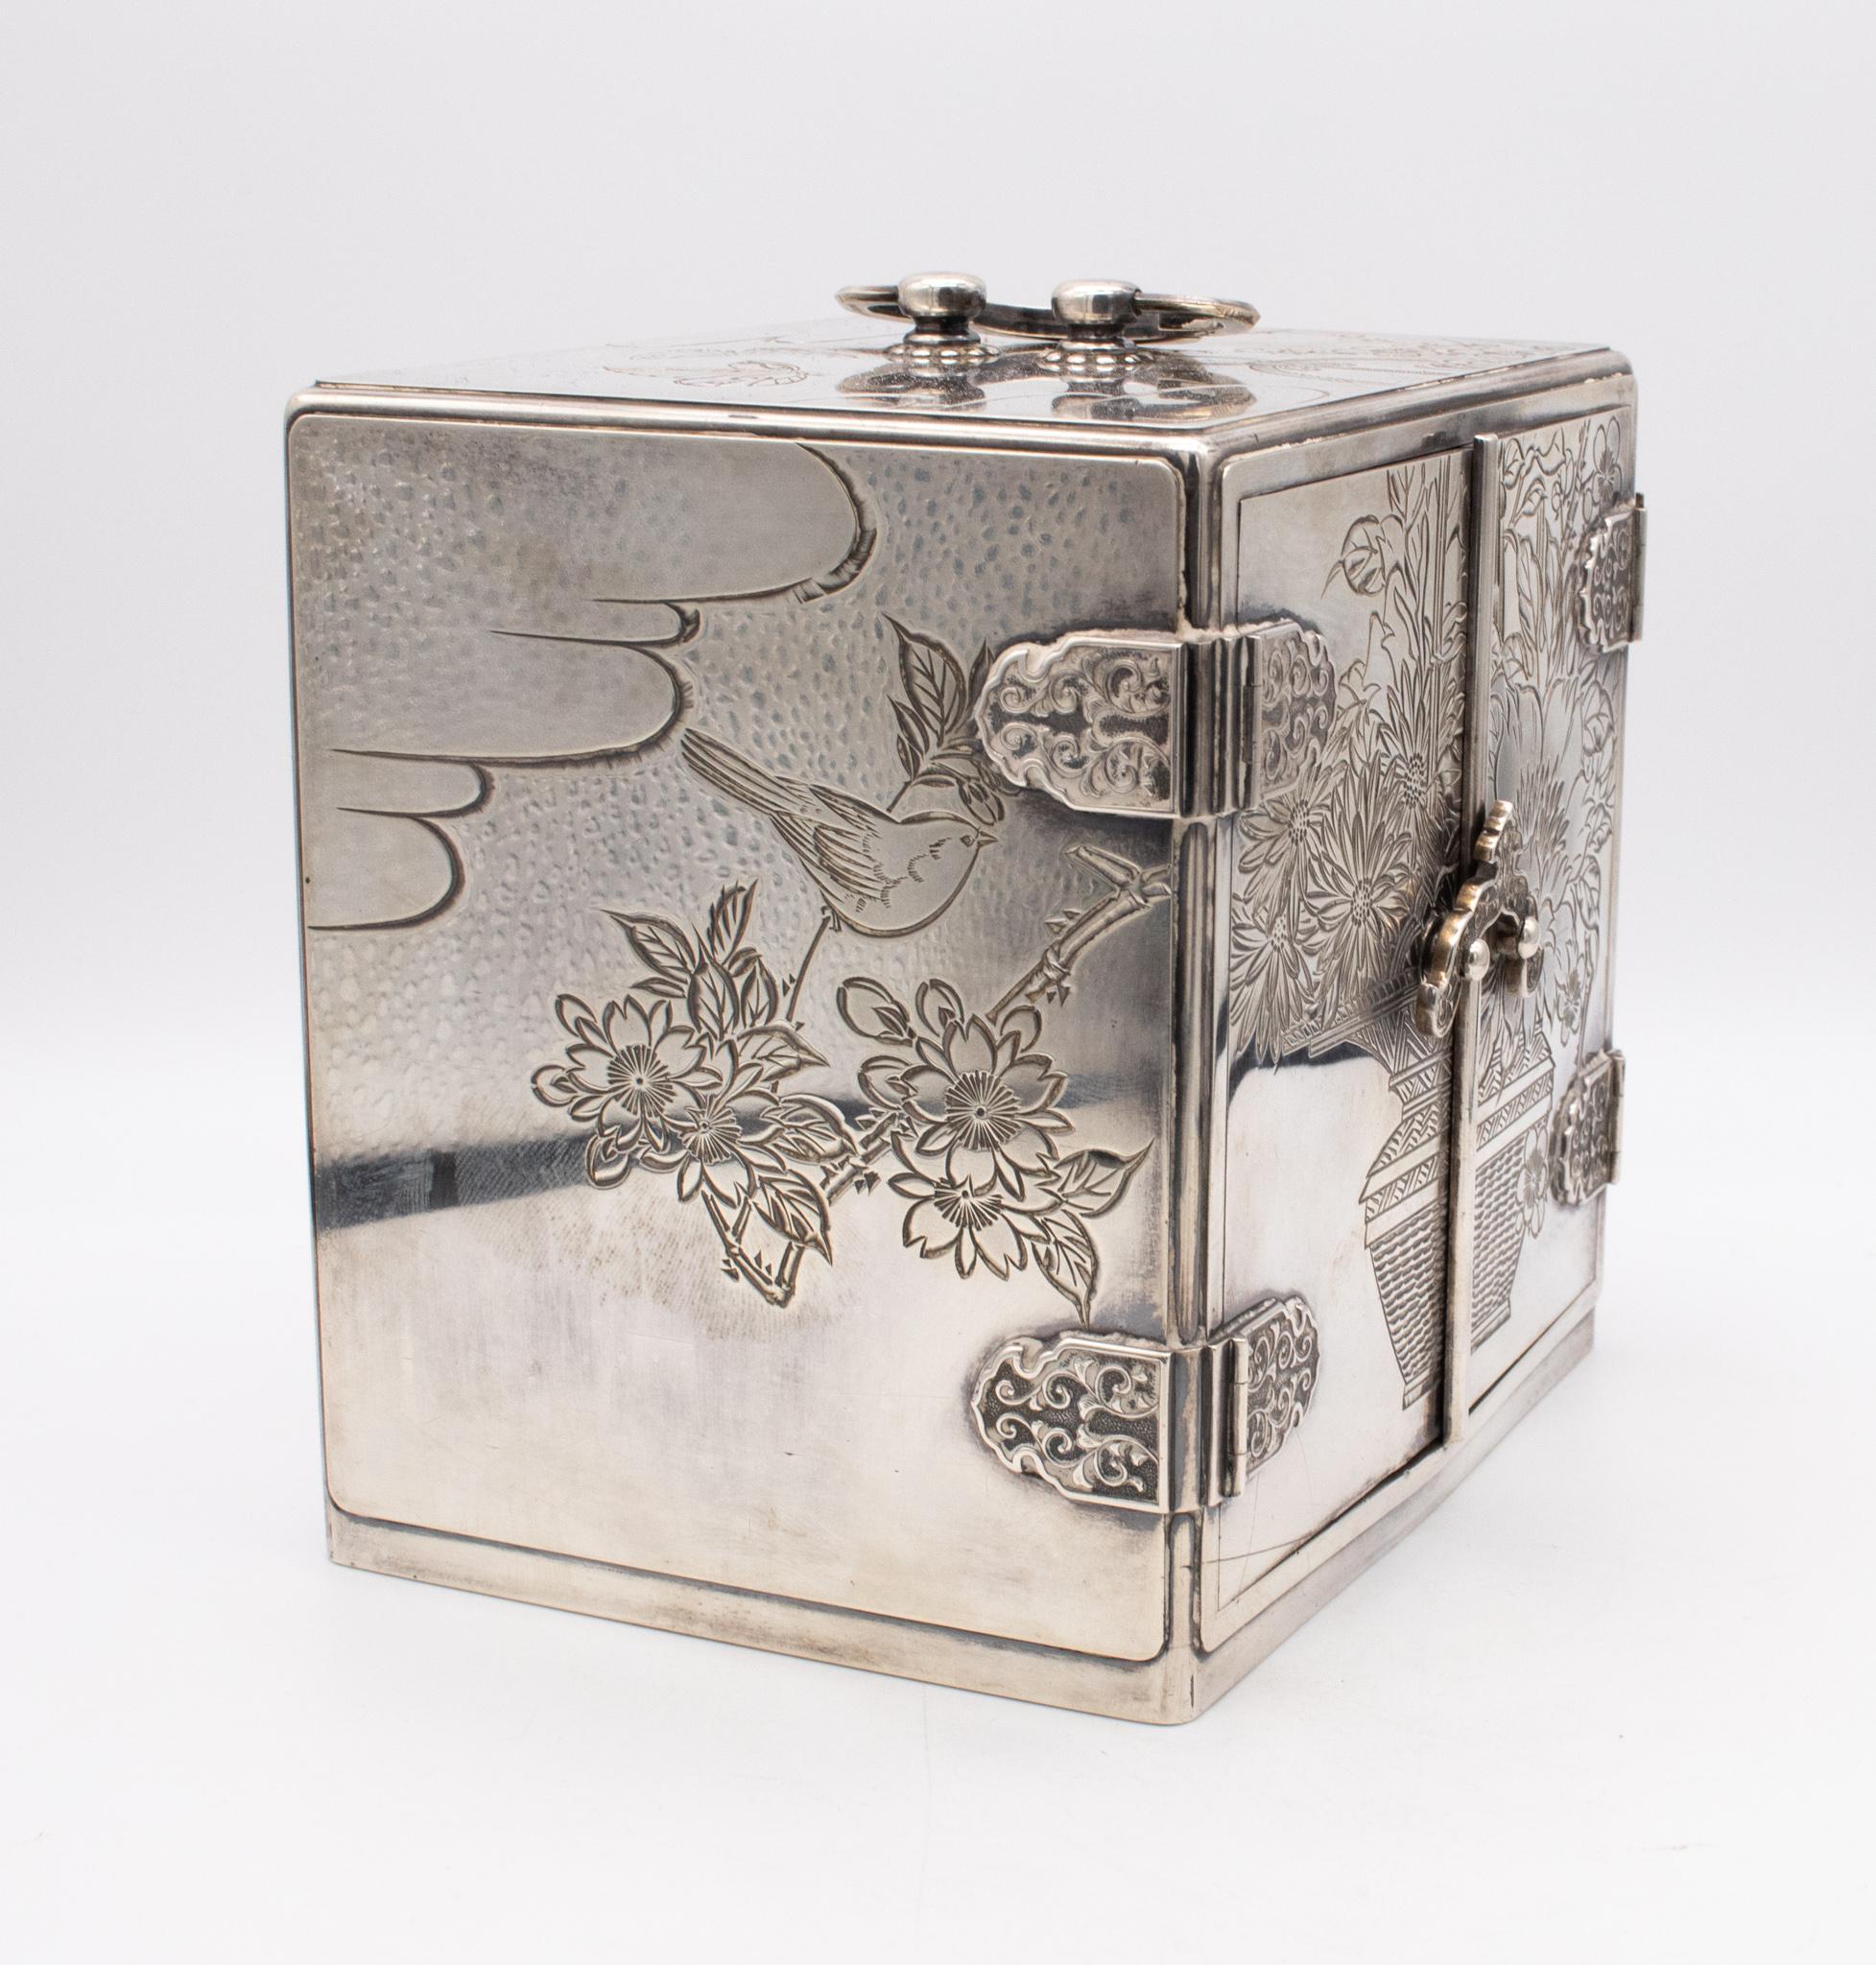 Japan Meiji Period 1868-1912 Jewel Box with Compartments Drawers Sterling Silver 3